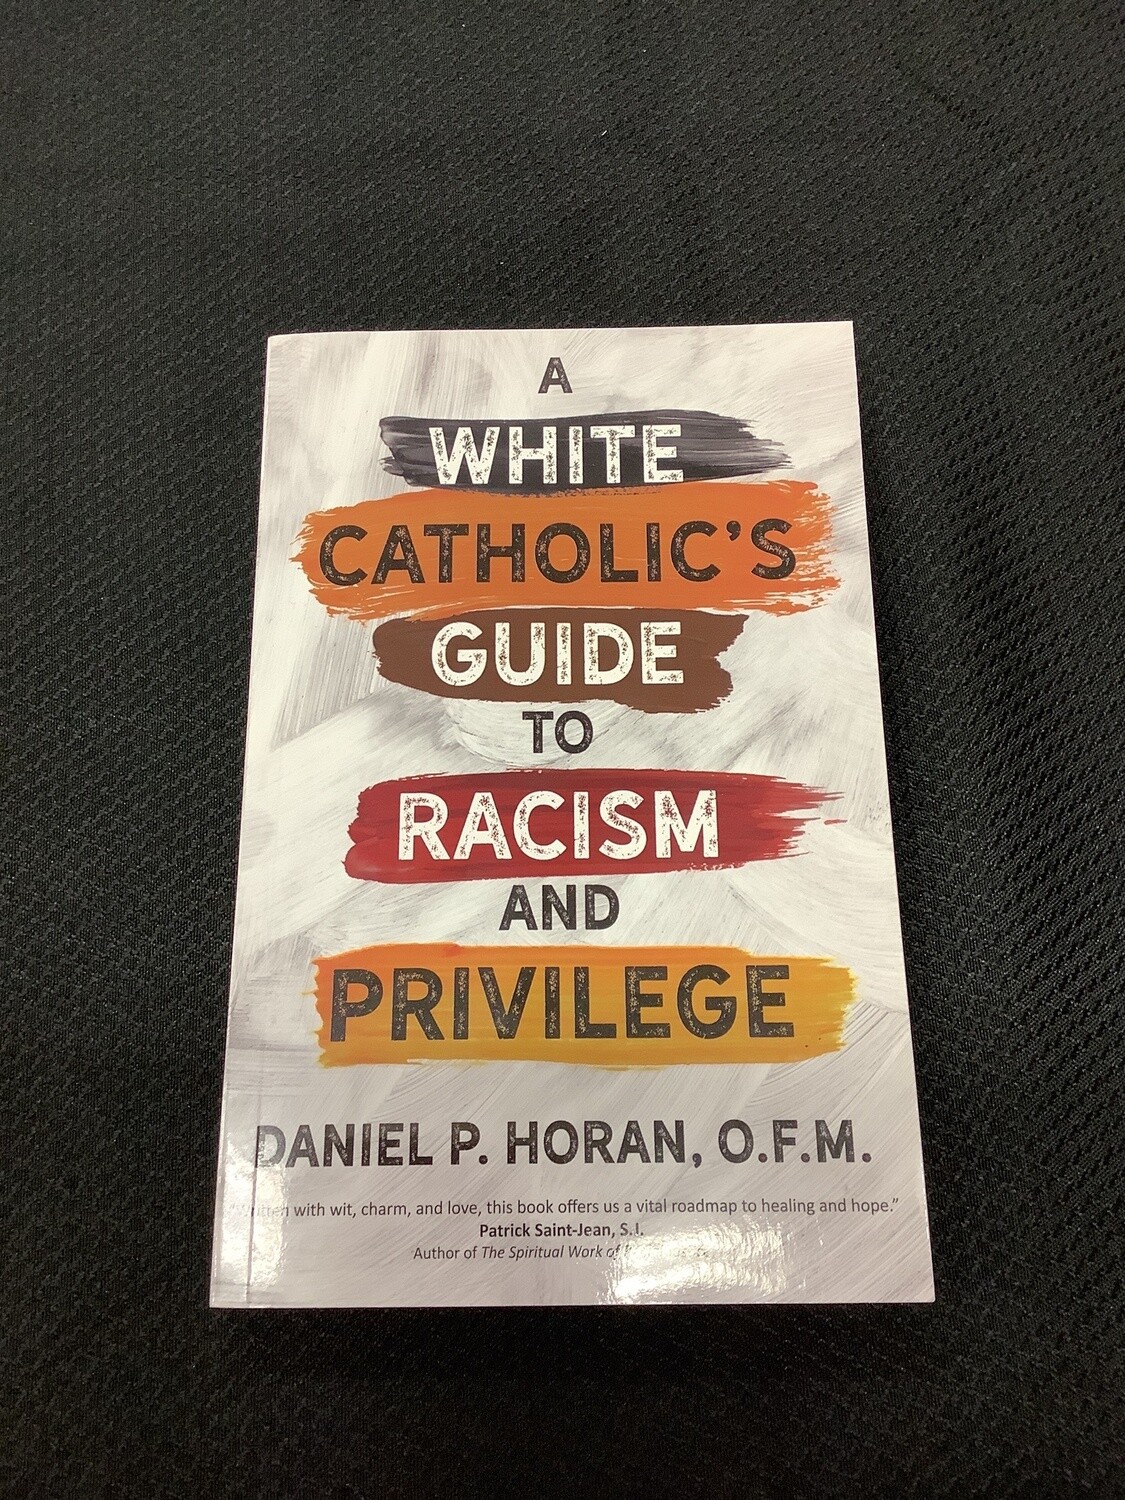 A White Catholic's Guide to Racism and Privilege - Daniel P. Horan, OFM